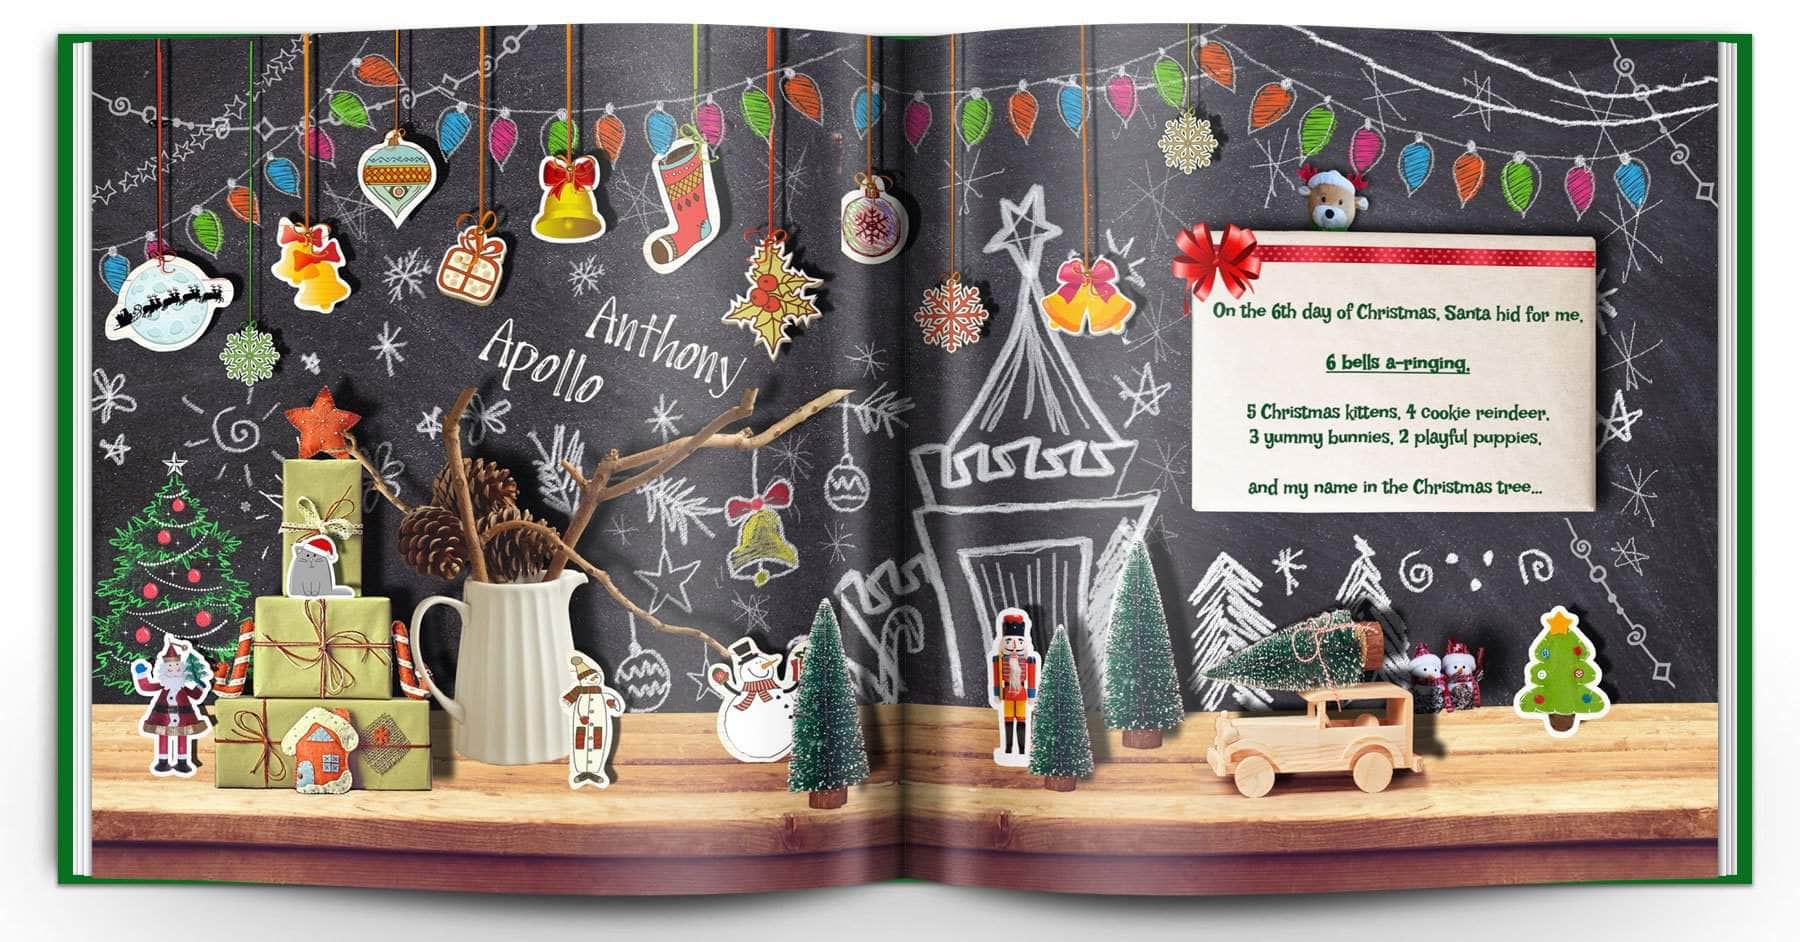 personalized storybook for christmas with 2 children